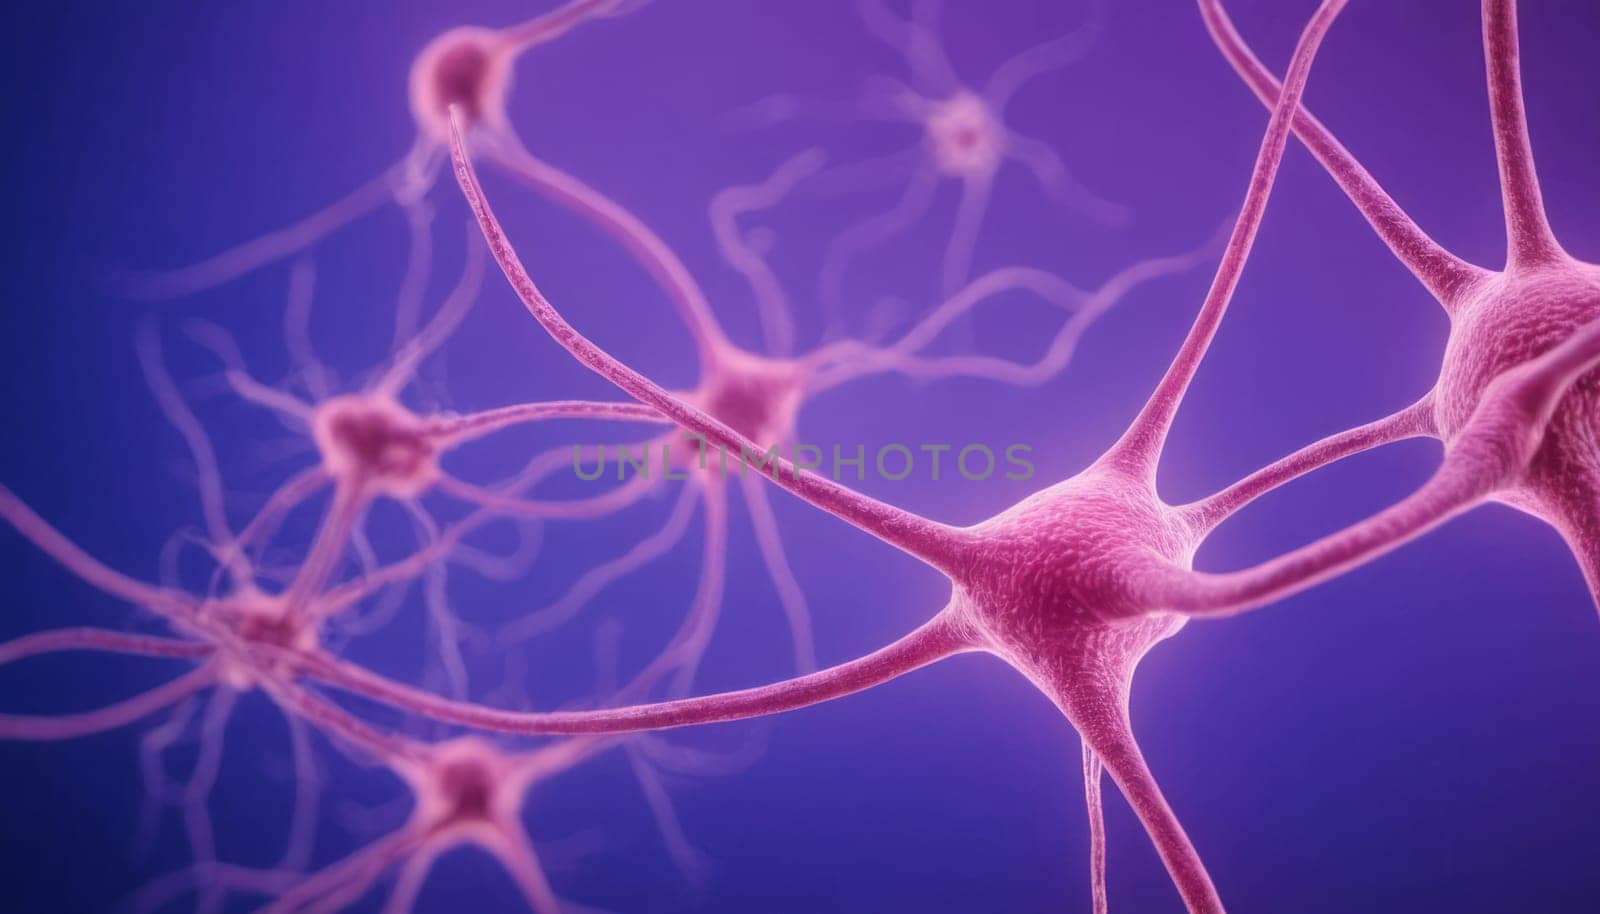 The image showcases pink neuron cells with intricate structures against a gradient purple background, highlighting the complexity of neural networks